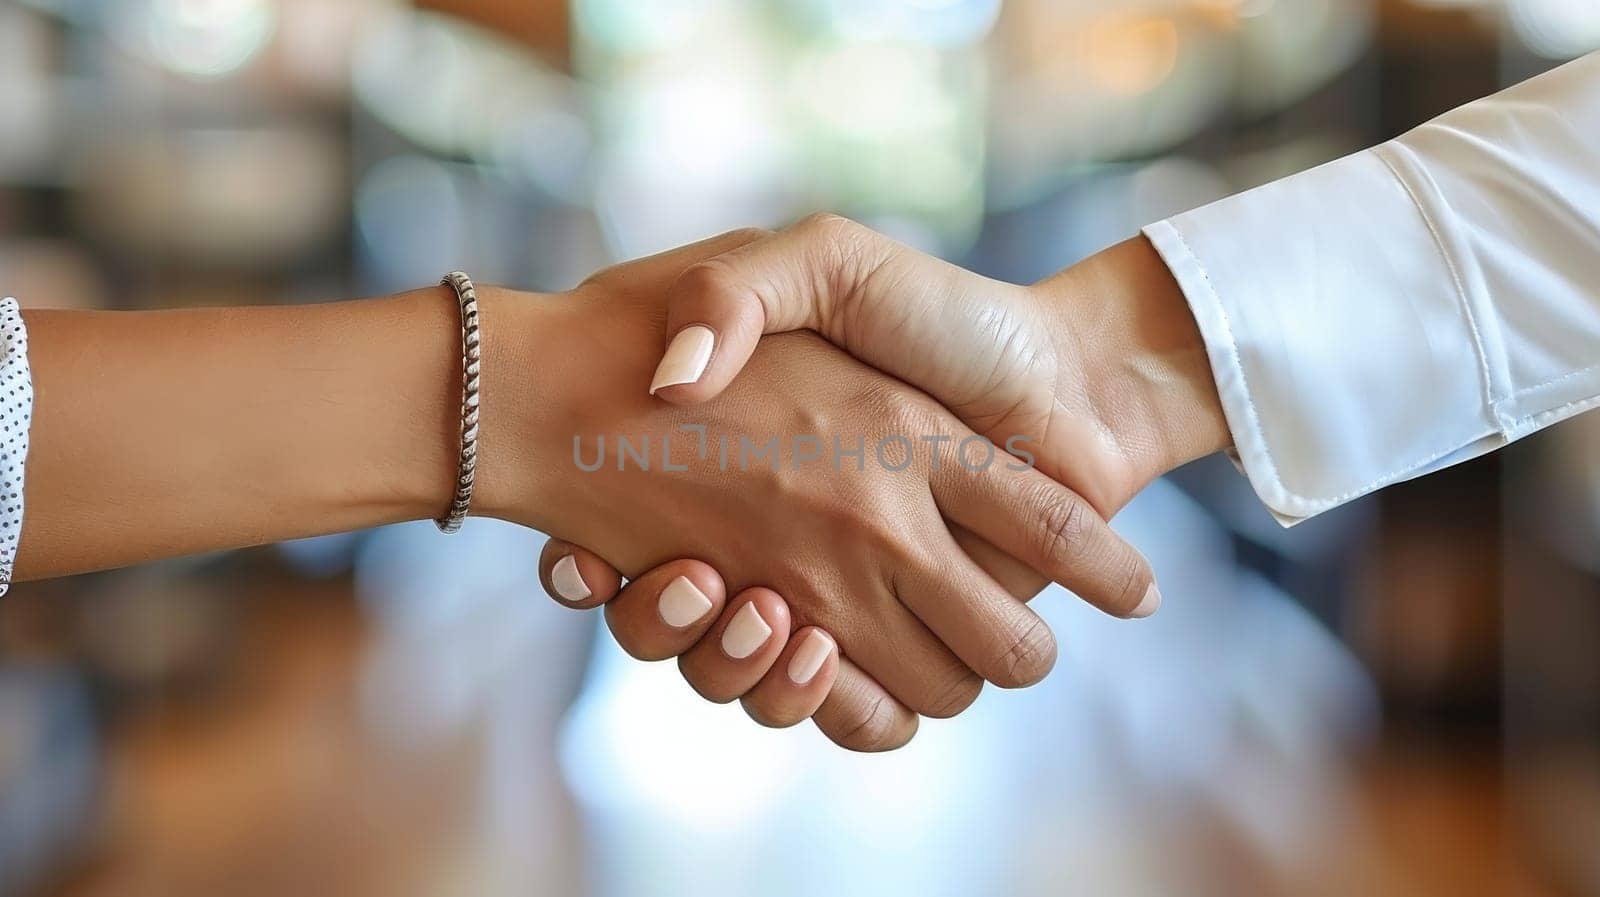 Two people shaking hands. The handshake is a symbol of agreement and trust. Concept of professionalism and respect